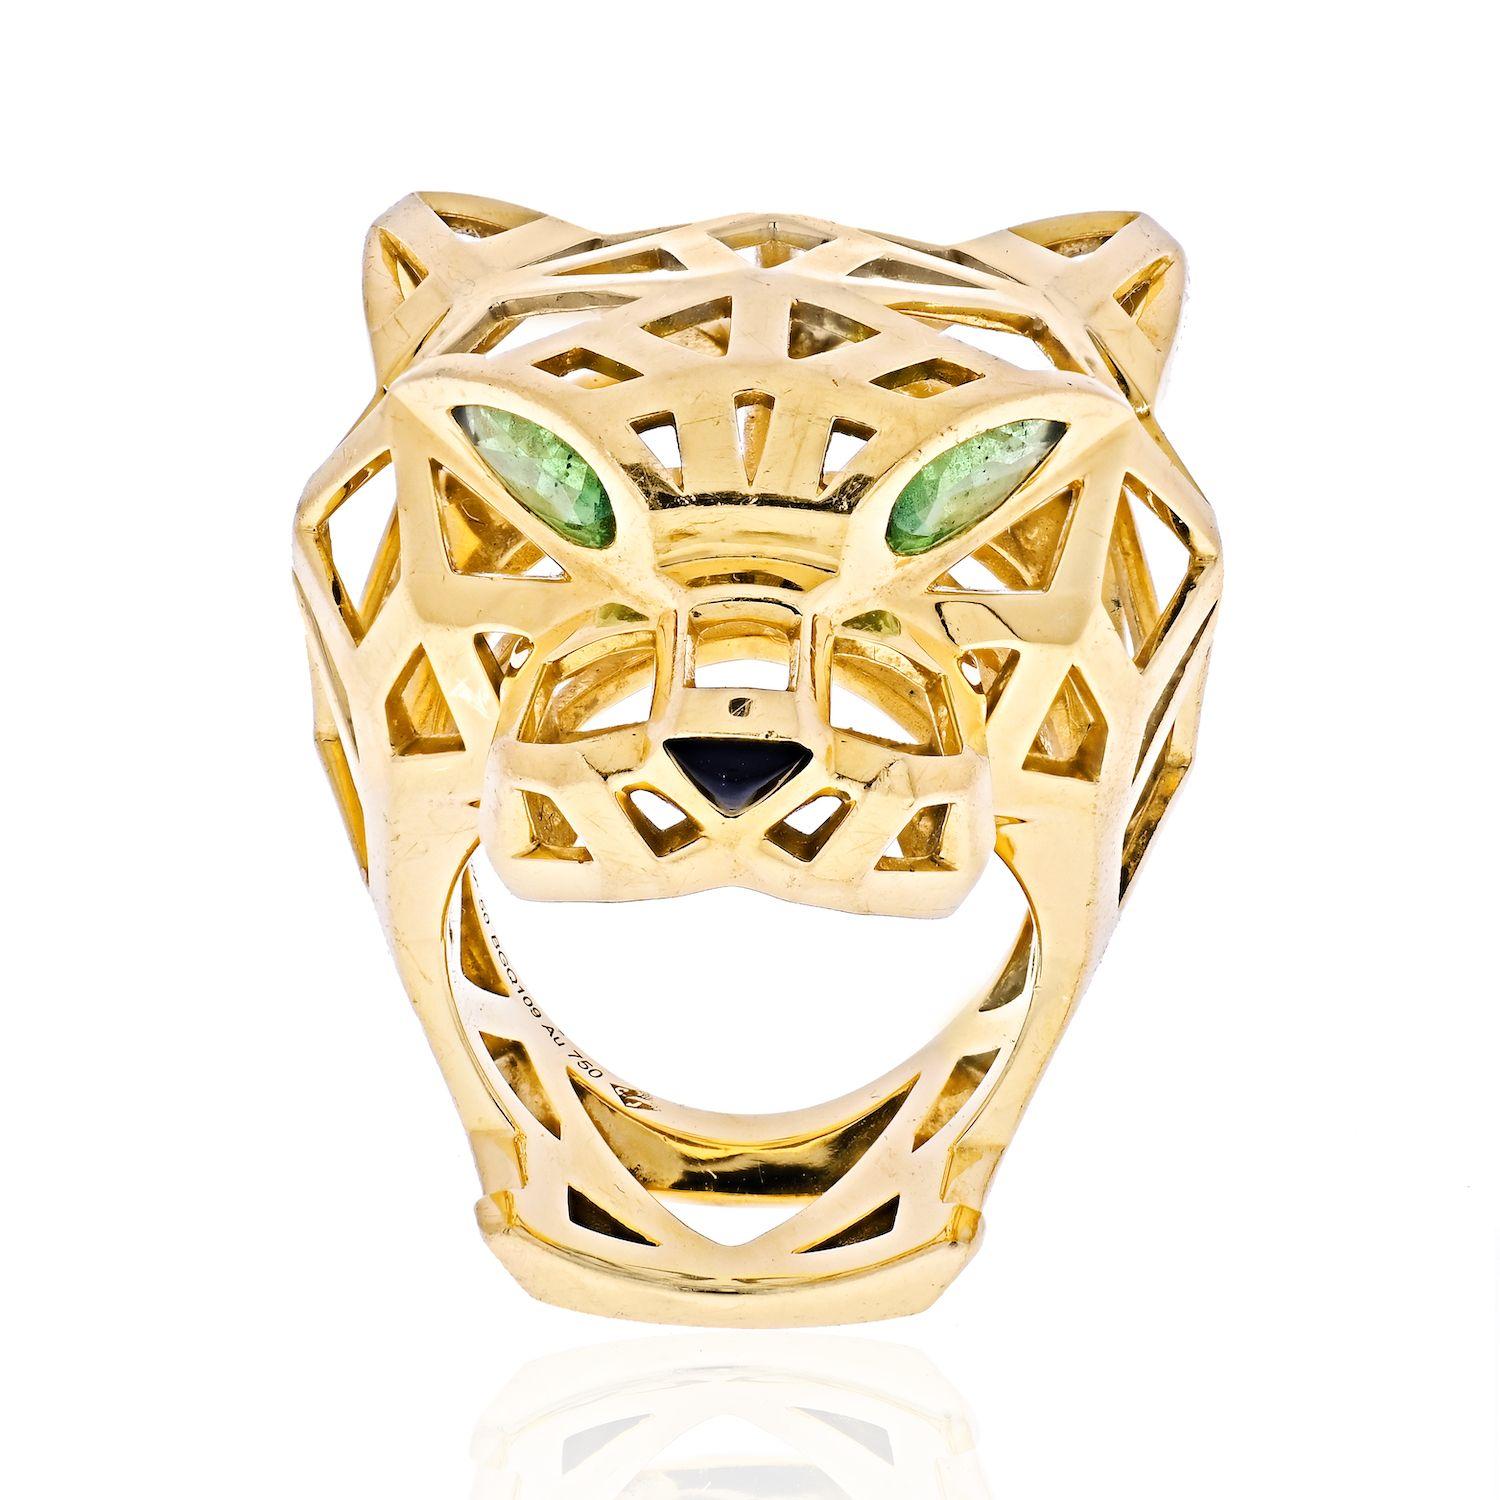 The emblematic panther has been an important part of Cartier's designs since 1914. This fiercely fashionable design from the Panthère de Cartier collection is made of 18K yellow gold and boasts an almost skeleton look. 
Panthere de Cartier ring, 18K